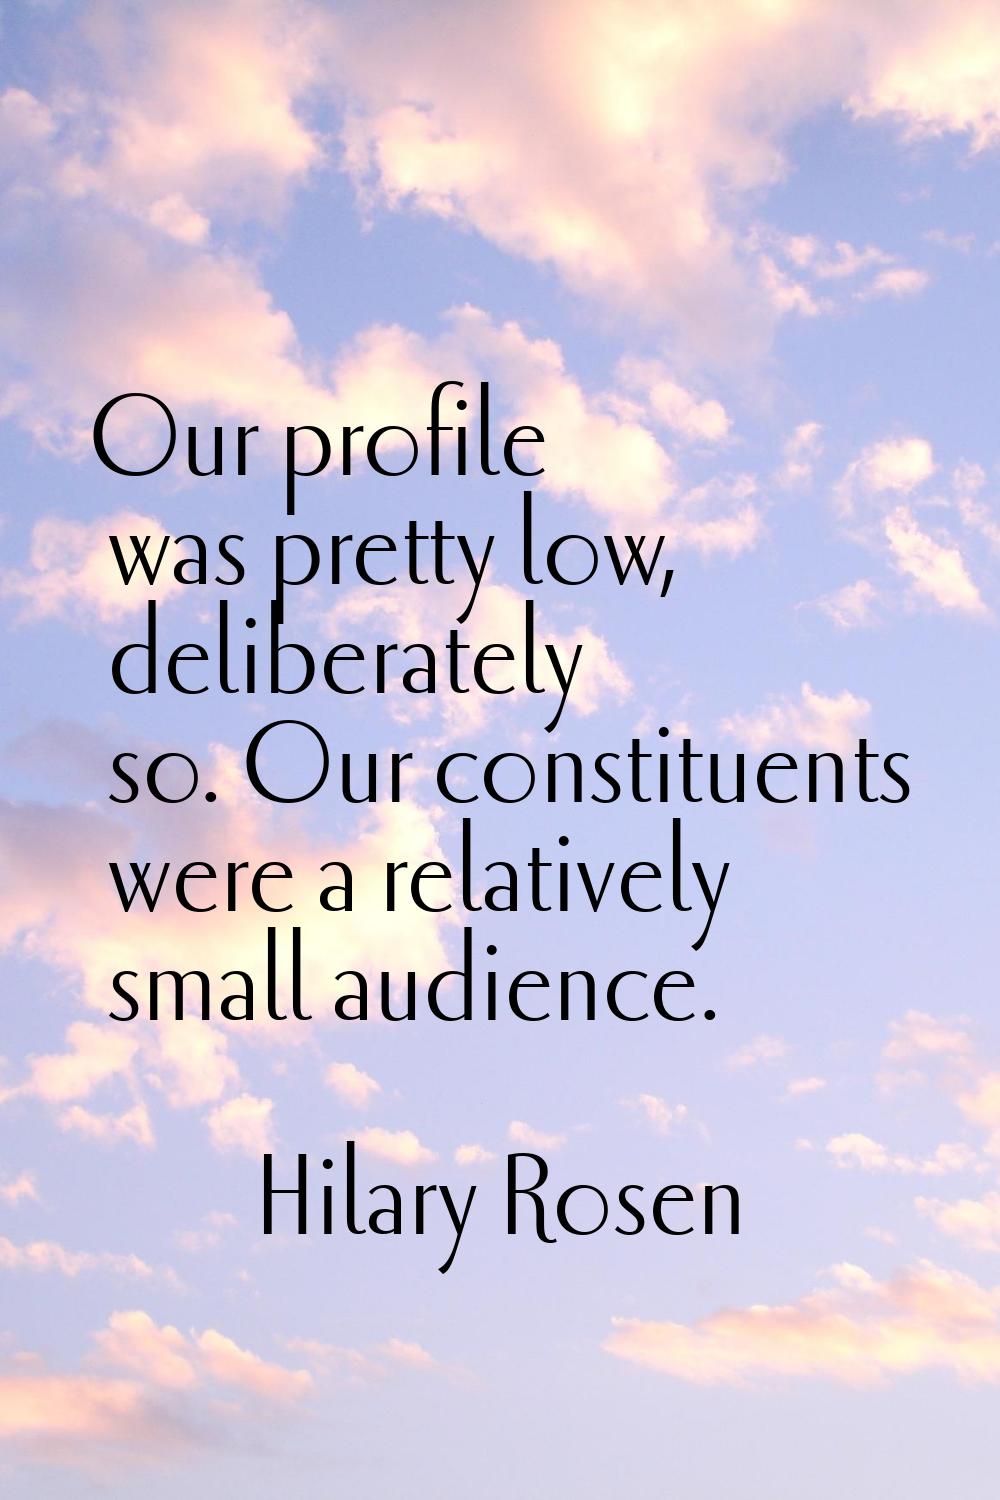 Our profile was pretty low, deliberately so. Our constituents were a relatively small audience.